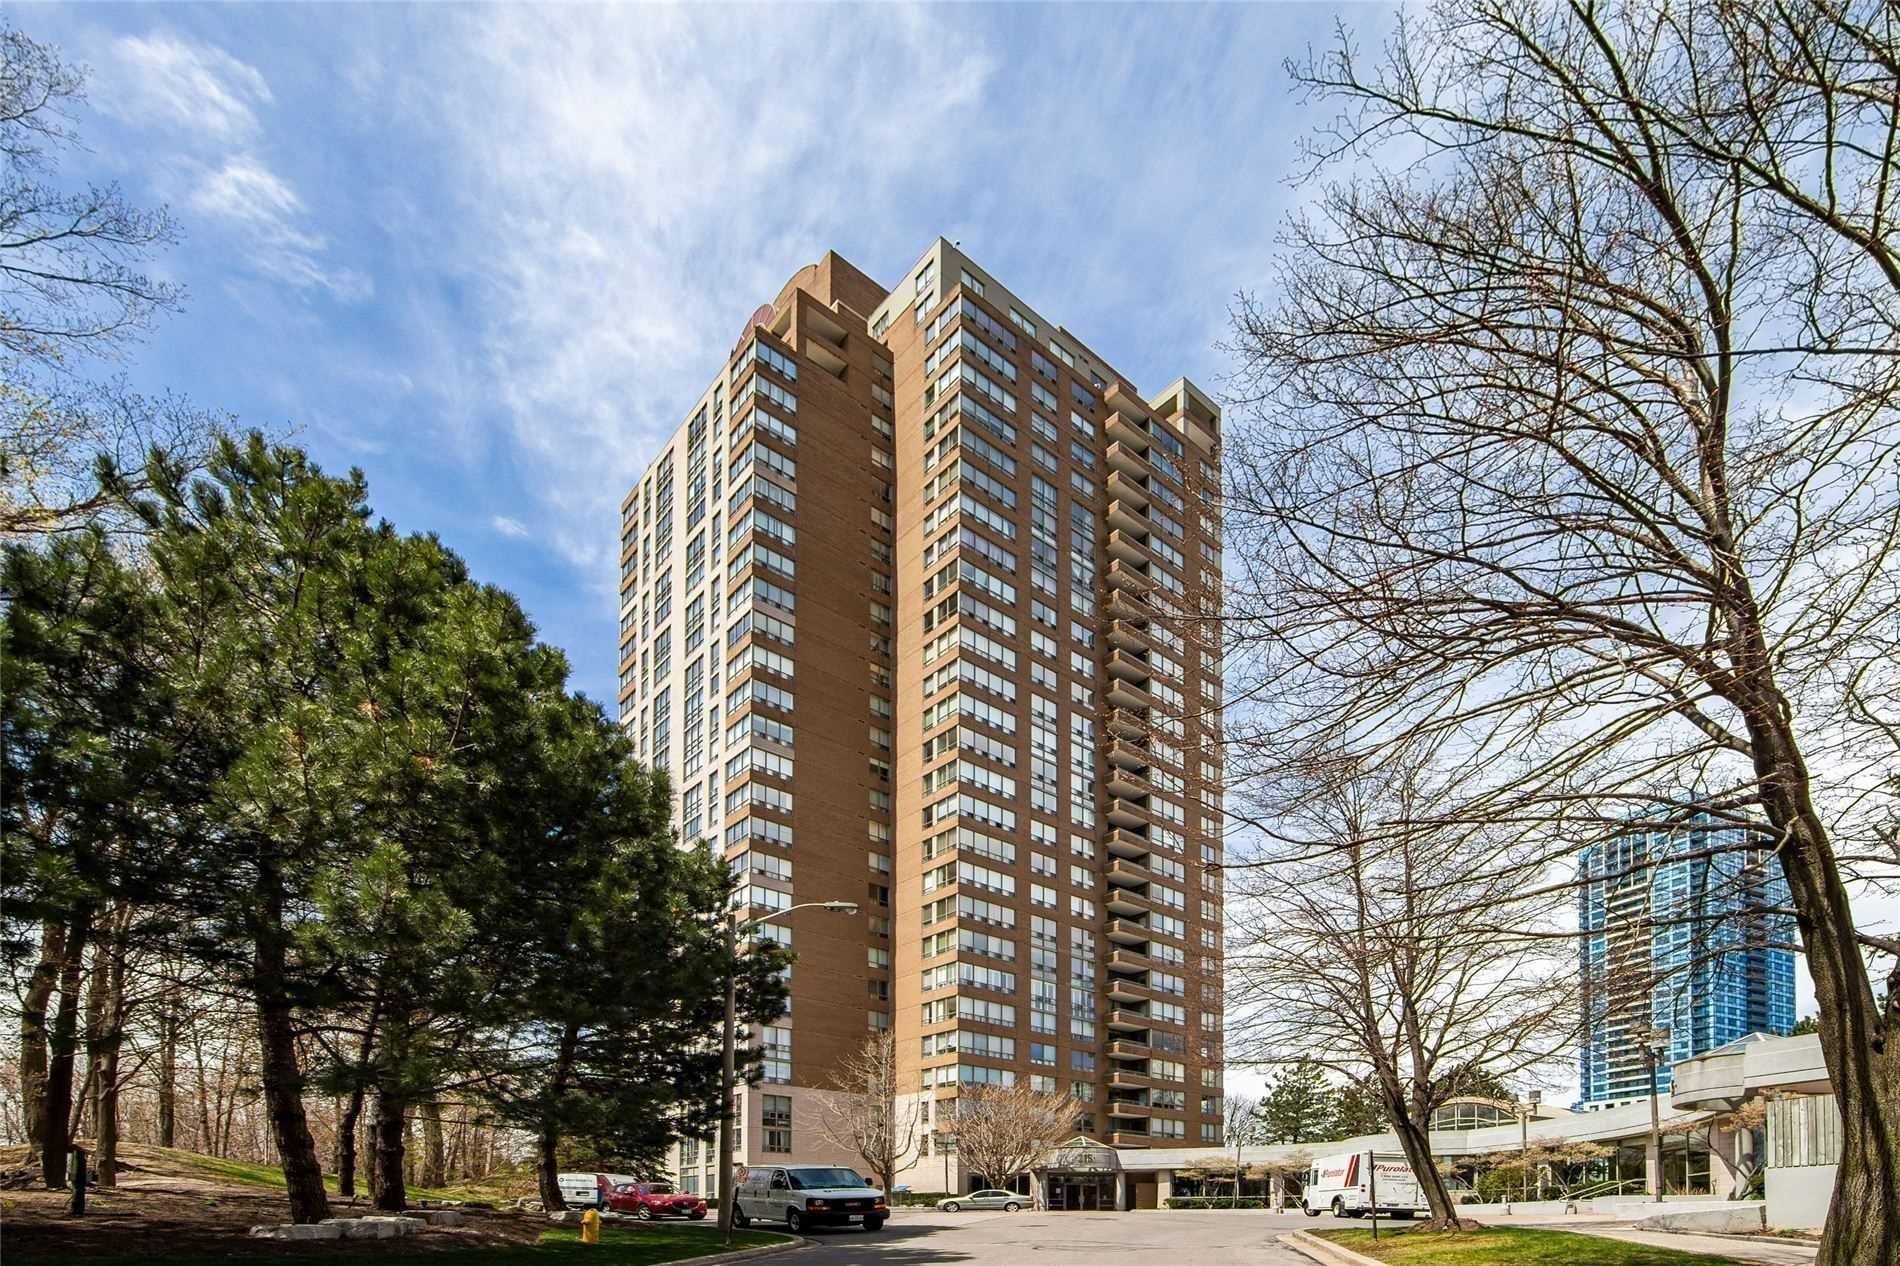 215 Wynford Dr. This condo at The Palisades Condos is located in  North York, Toronto - image #2 of 3 by Strata.ca